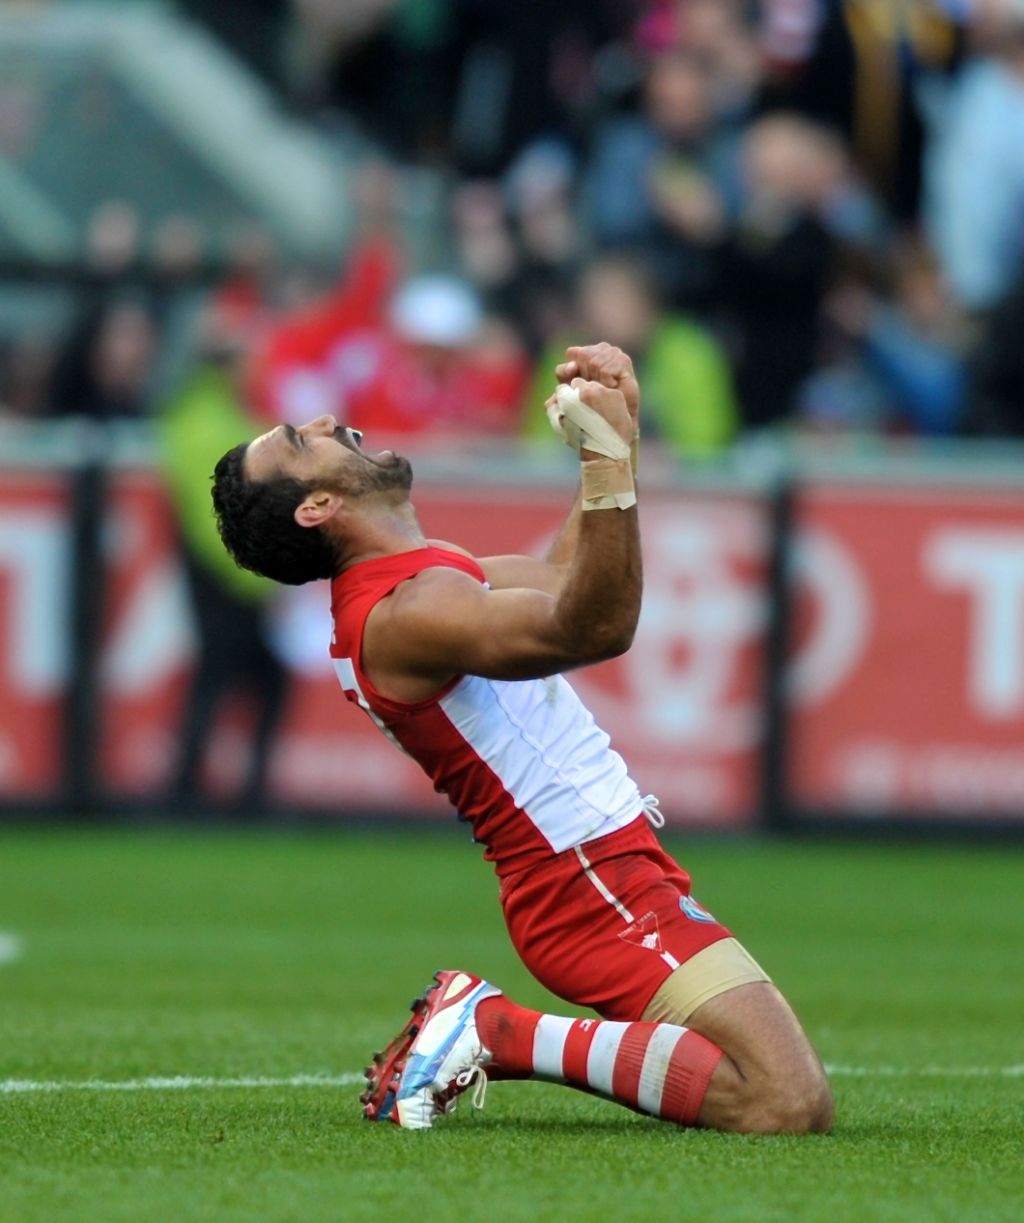 Adam Goodes erupts with passion at the Sydney Swans' 10-point win over Hawthorn in the 2012 AFL Grand Final. Photo: Wayne Taylor